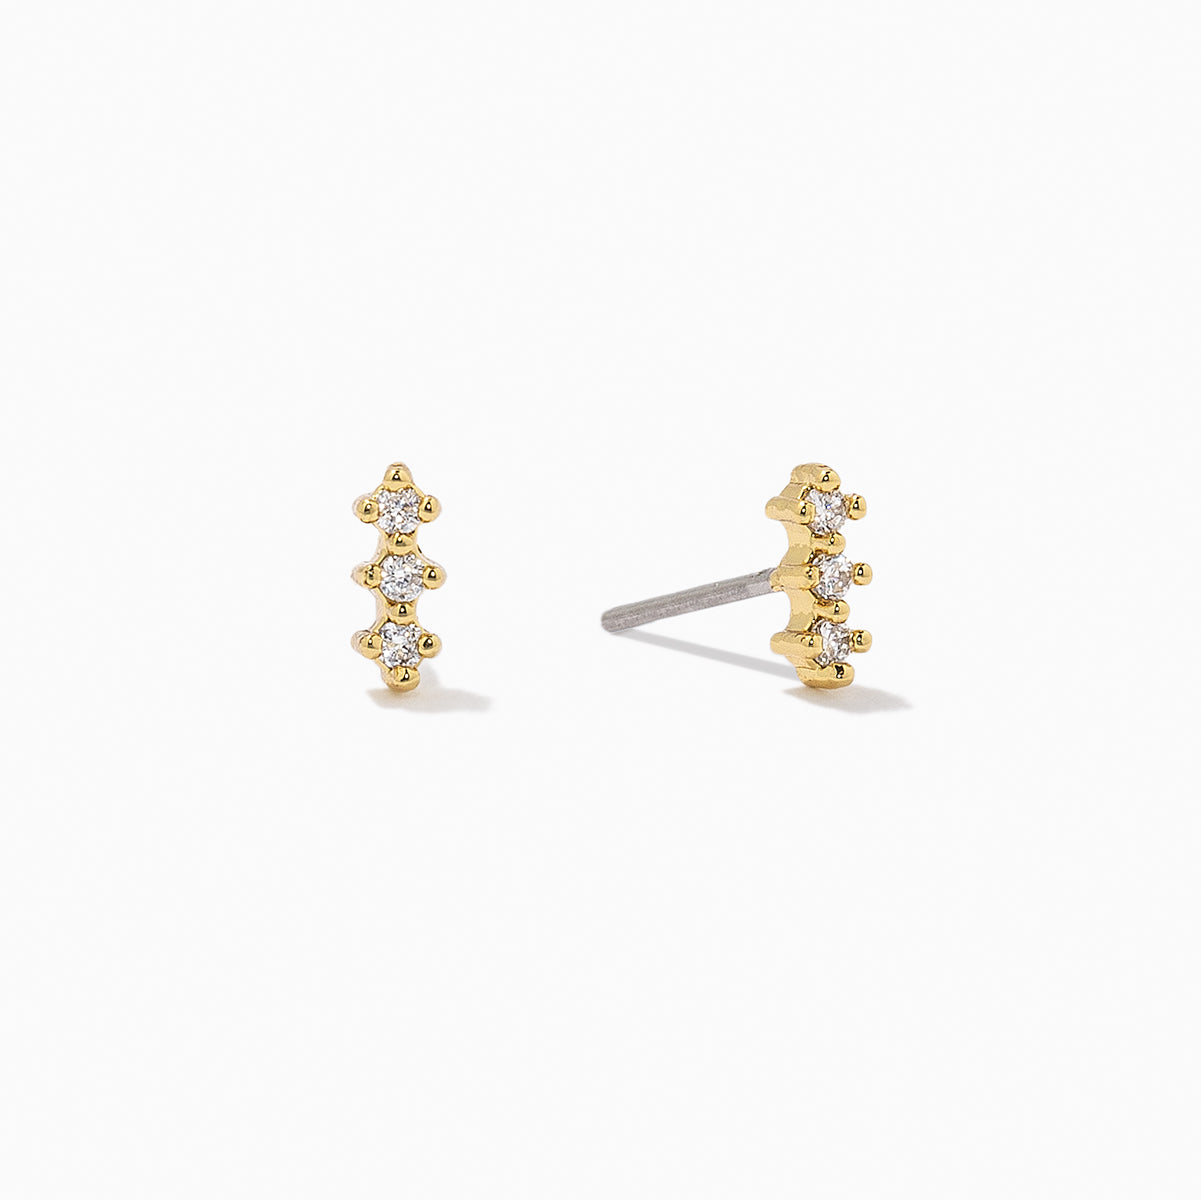 Easy Stud Earrings | Gold | Product Image | Uncommon James